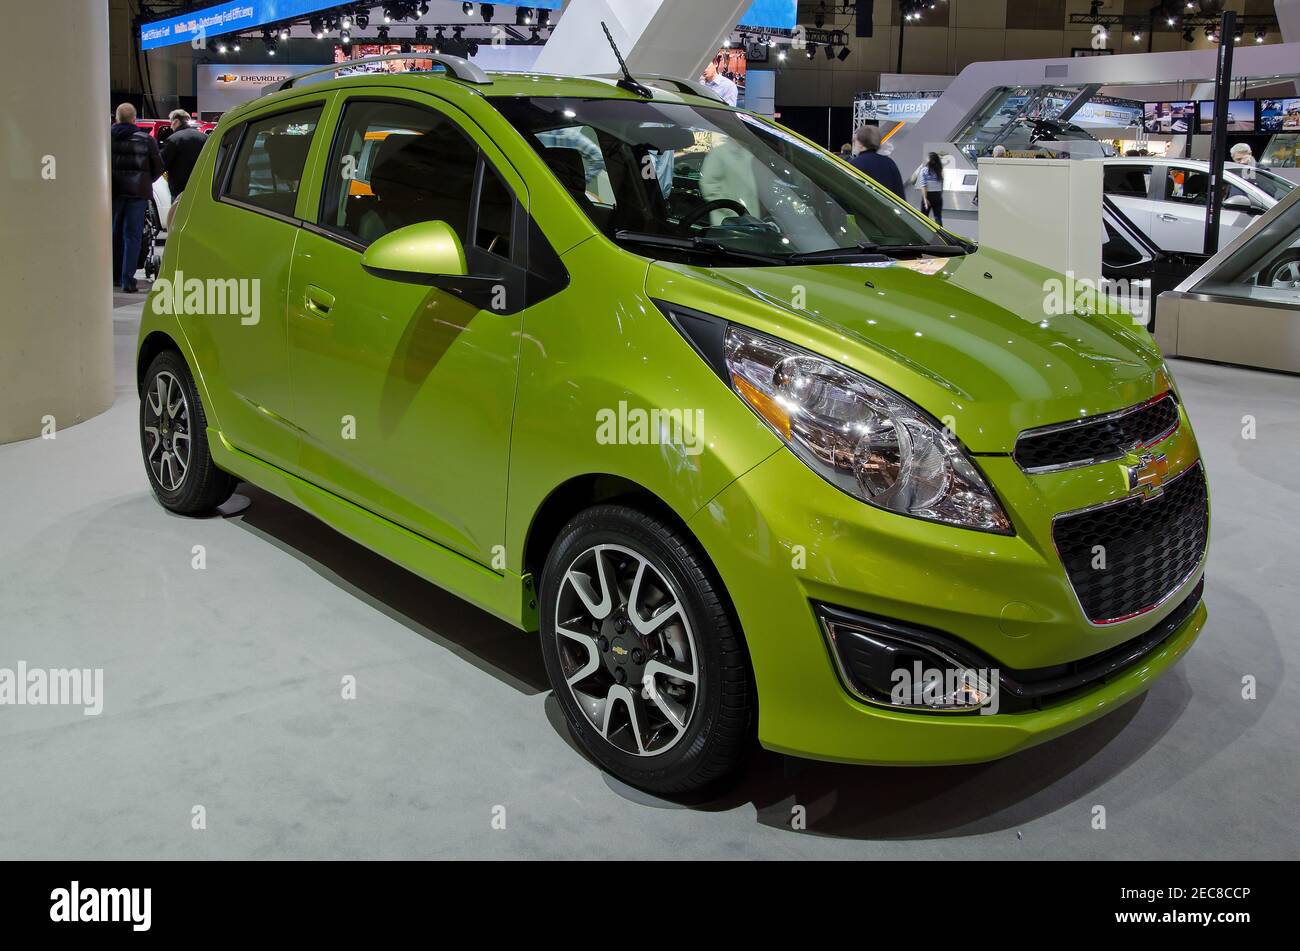 Exhibition of the  Chevrolet Spark during the Canadian International Auto Show, Toronto, Canada-Feb. 2012 Stock Photo